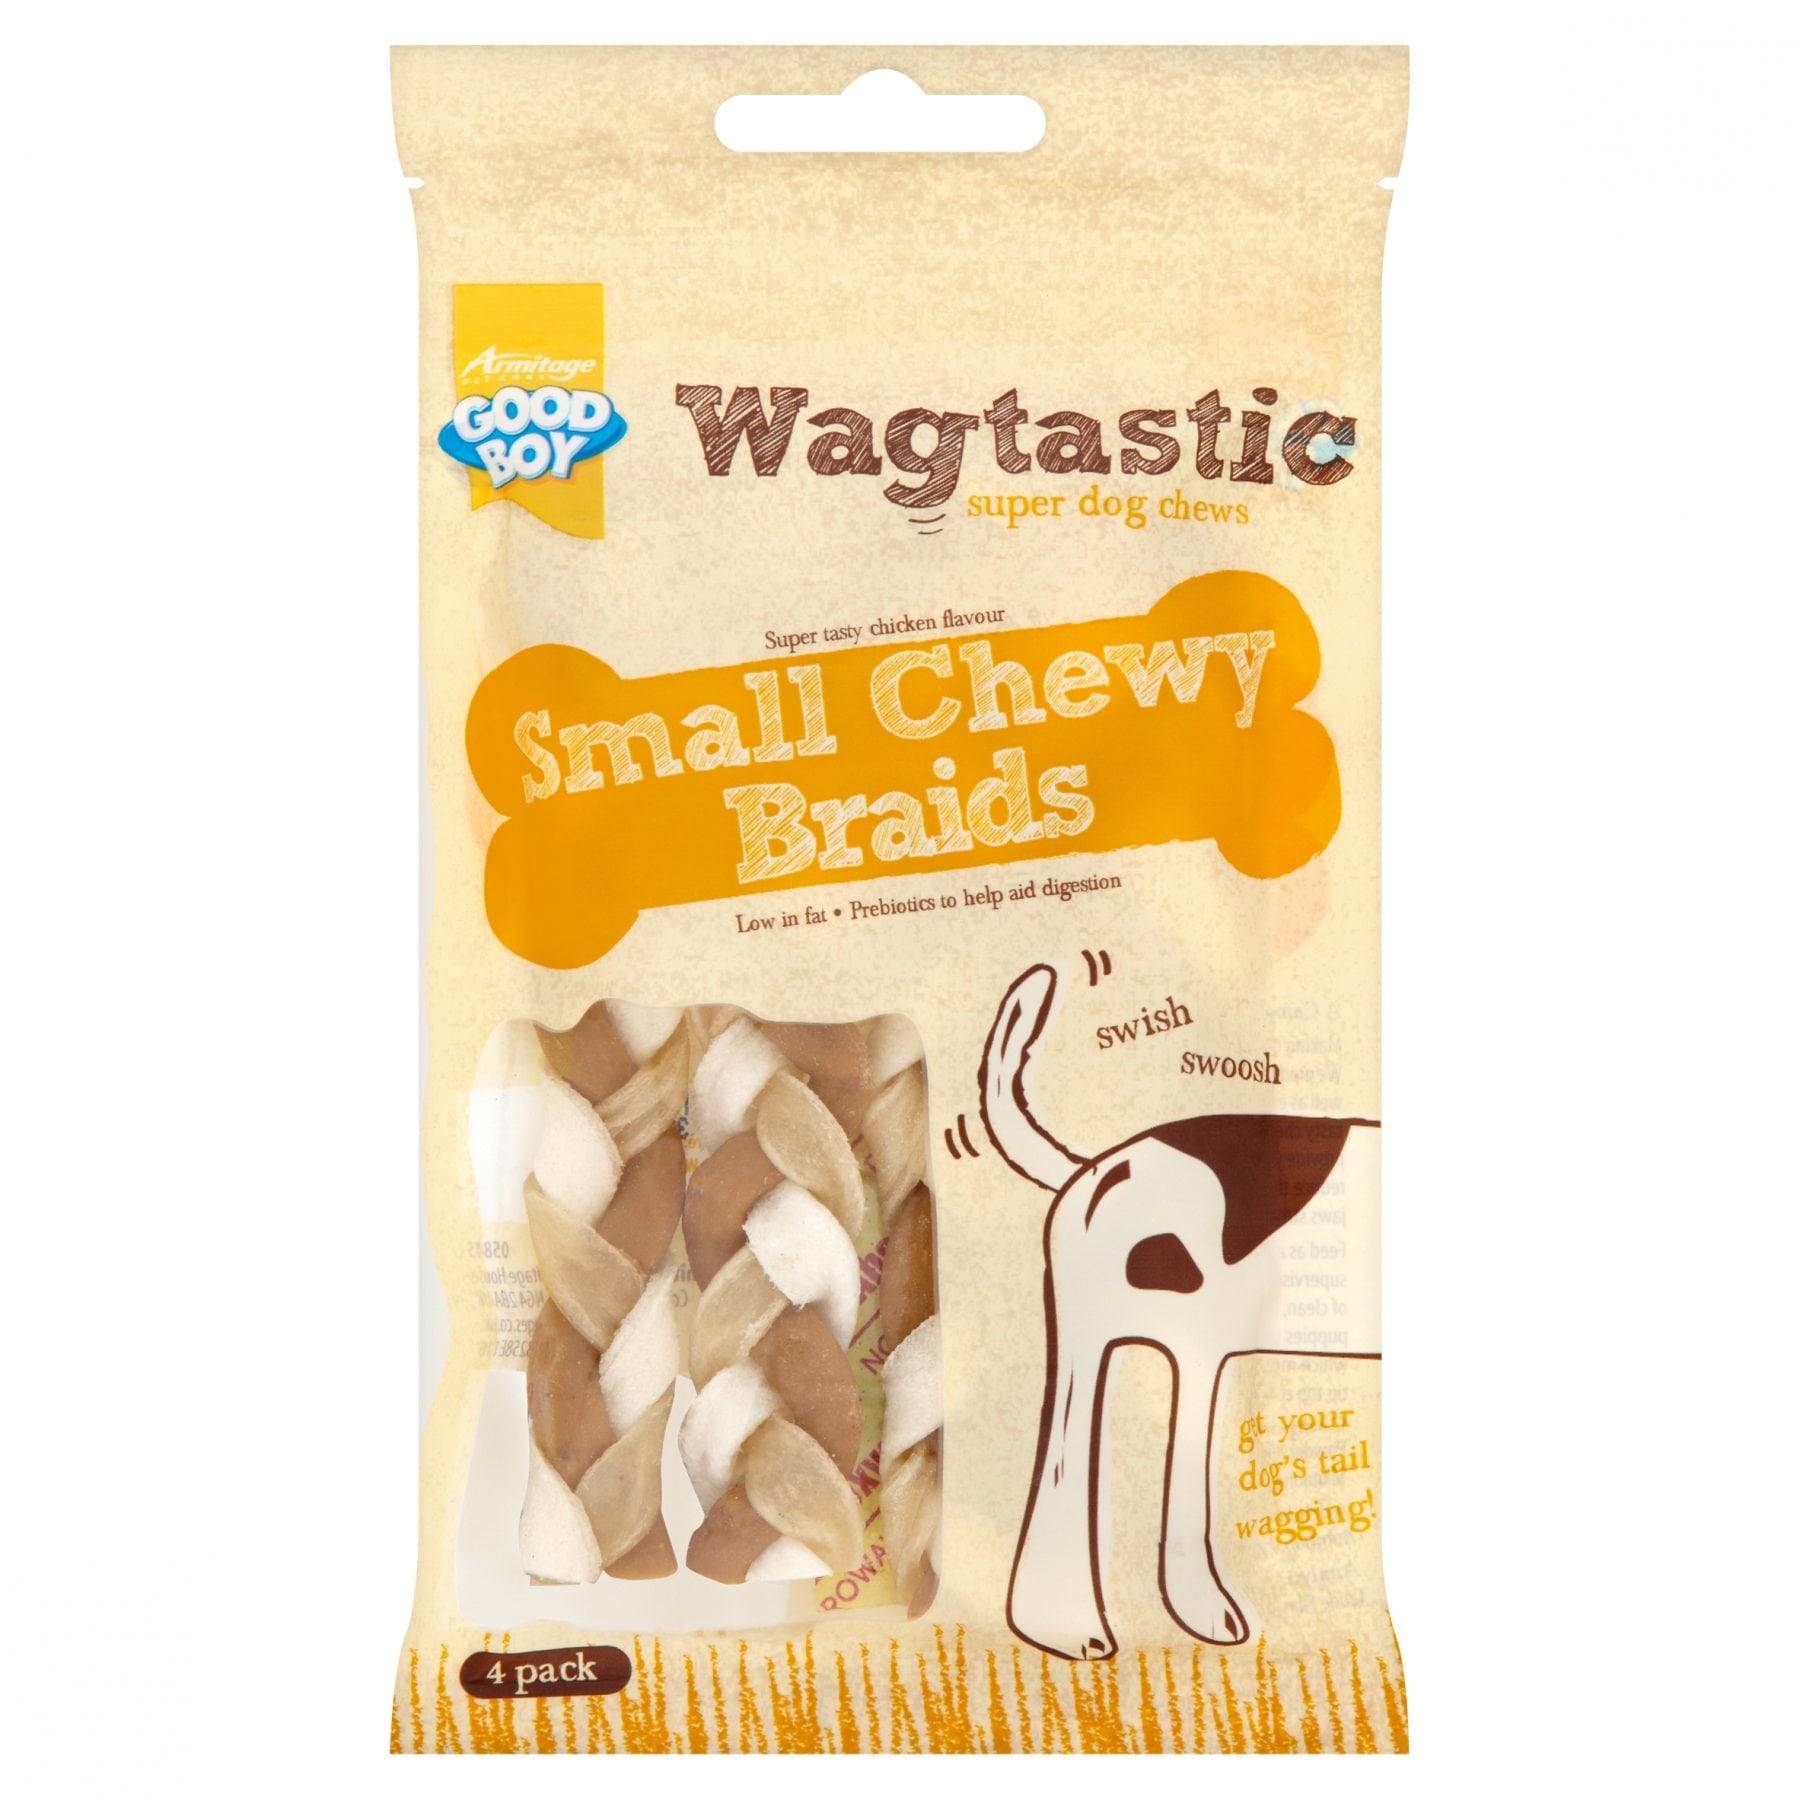 Small Chewy Braids Dog Treats 4 Pack 